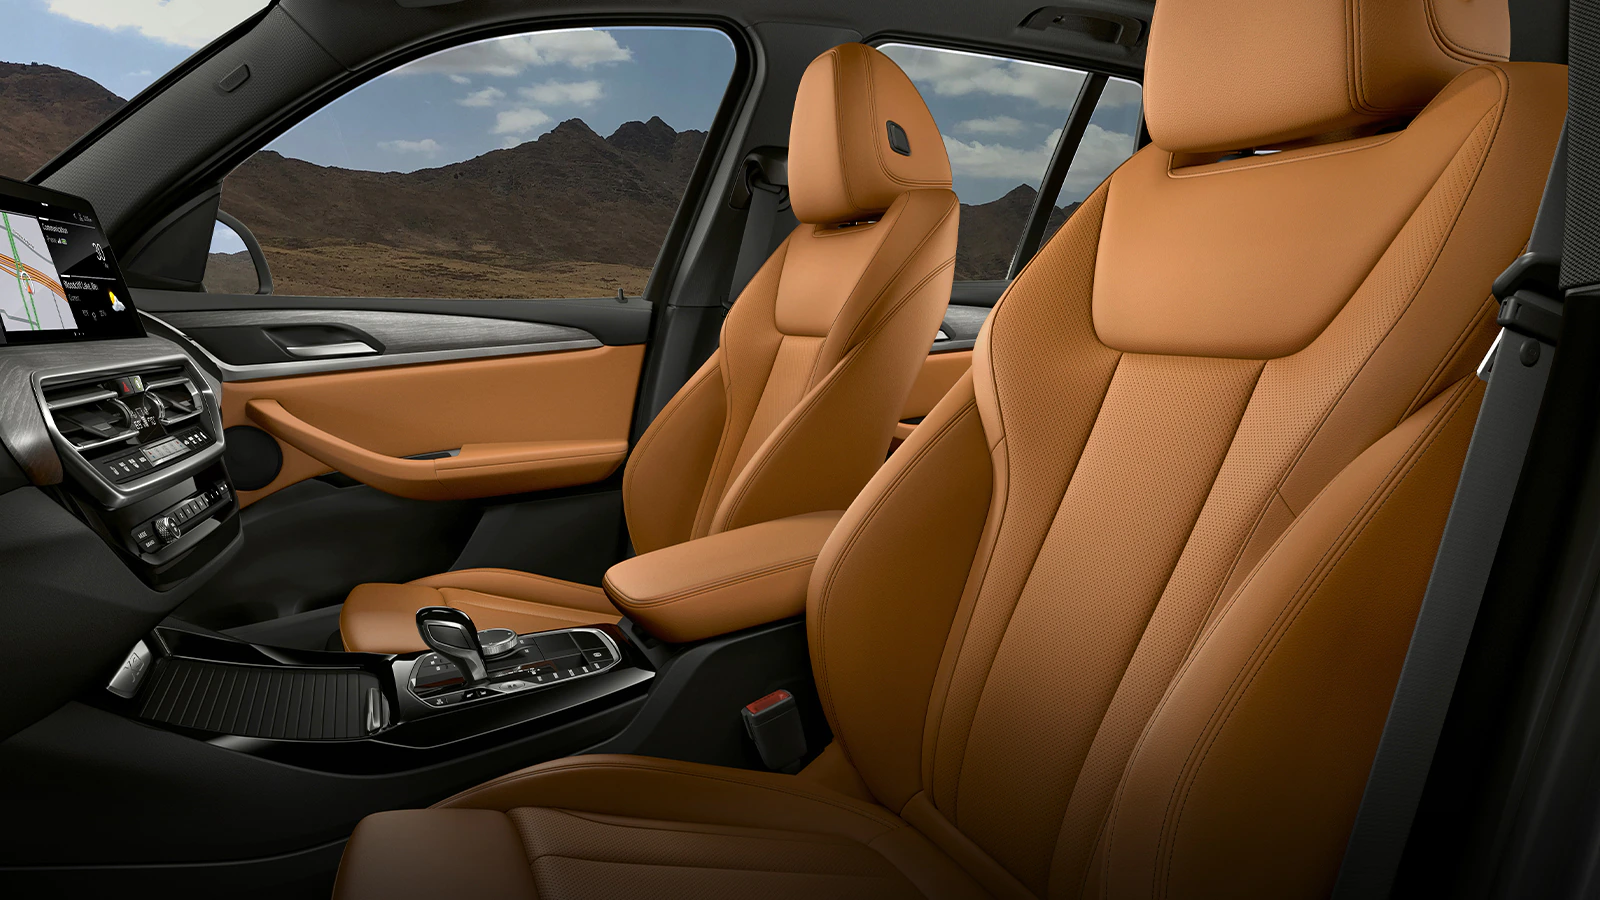 An interior view of the 2023 BMW X3 front seats